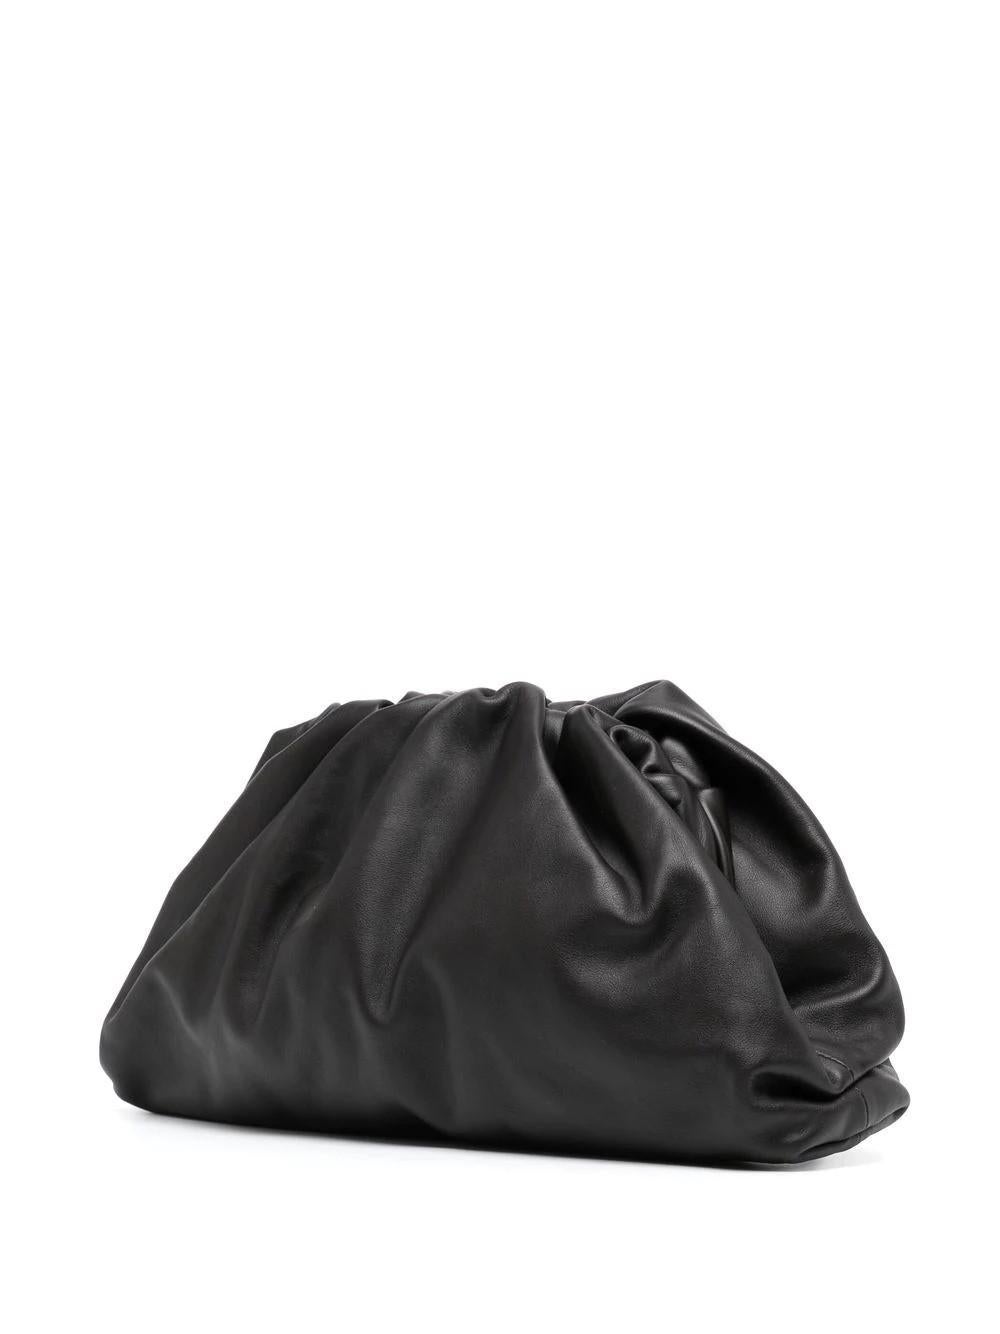 This contemporary Bottega Veneta The Pouch clutch bag features ruched detailing and slouched silhouette. Crafted in Italy from smooth black leather, it has a magnetic fastening and a compact interior with an internal logo stamp. This cult favourite